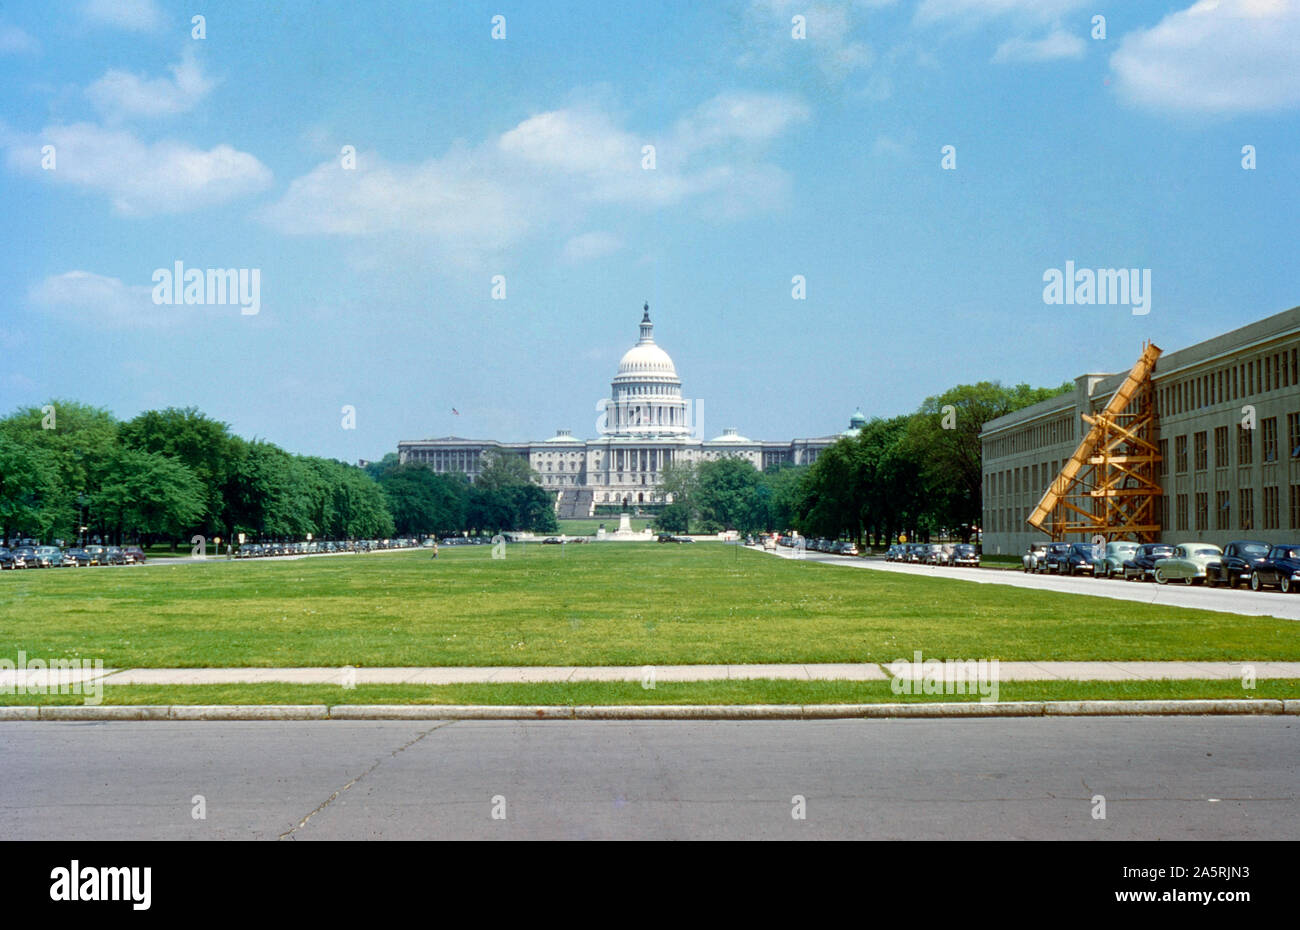 Antique c1940 photograph, the United States Capitol Building in Washington, D.C. SOURCE: ORIGINAL 35mm TRANSPARENCY Stock Photo